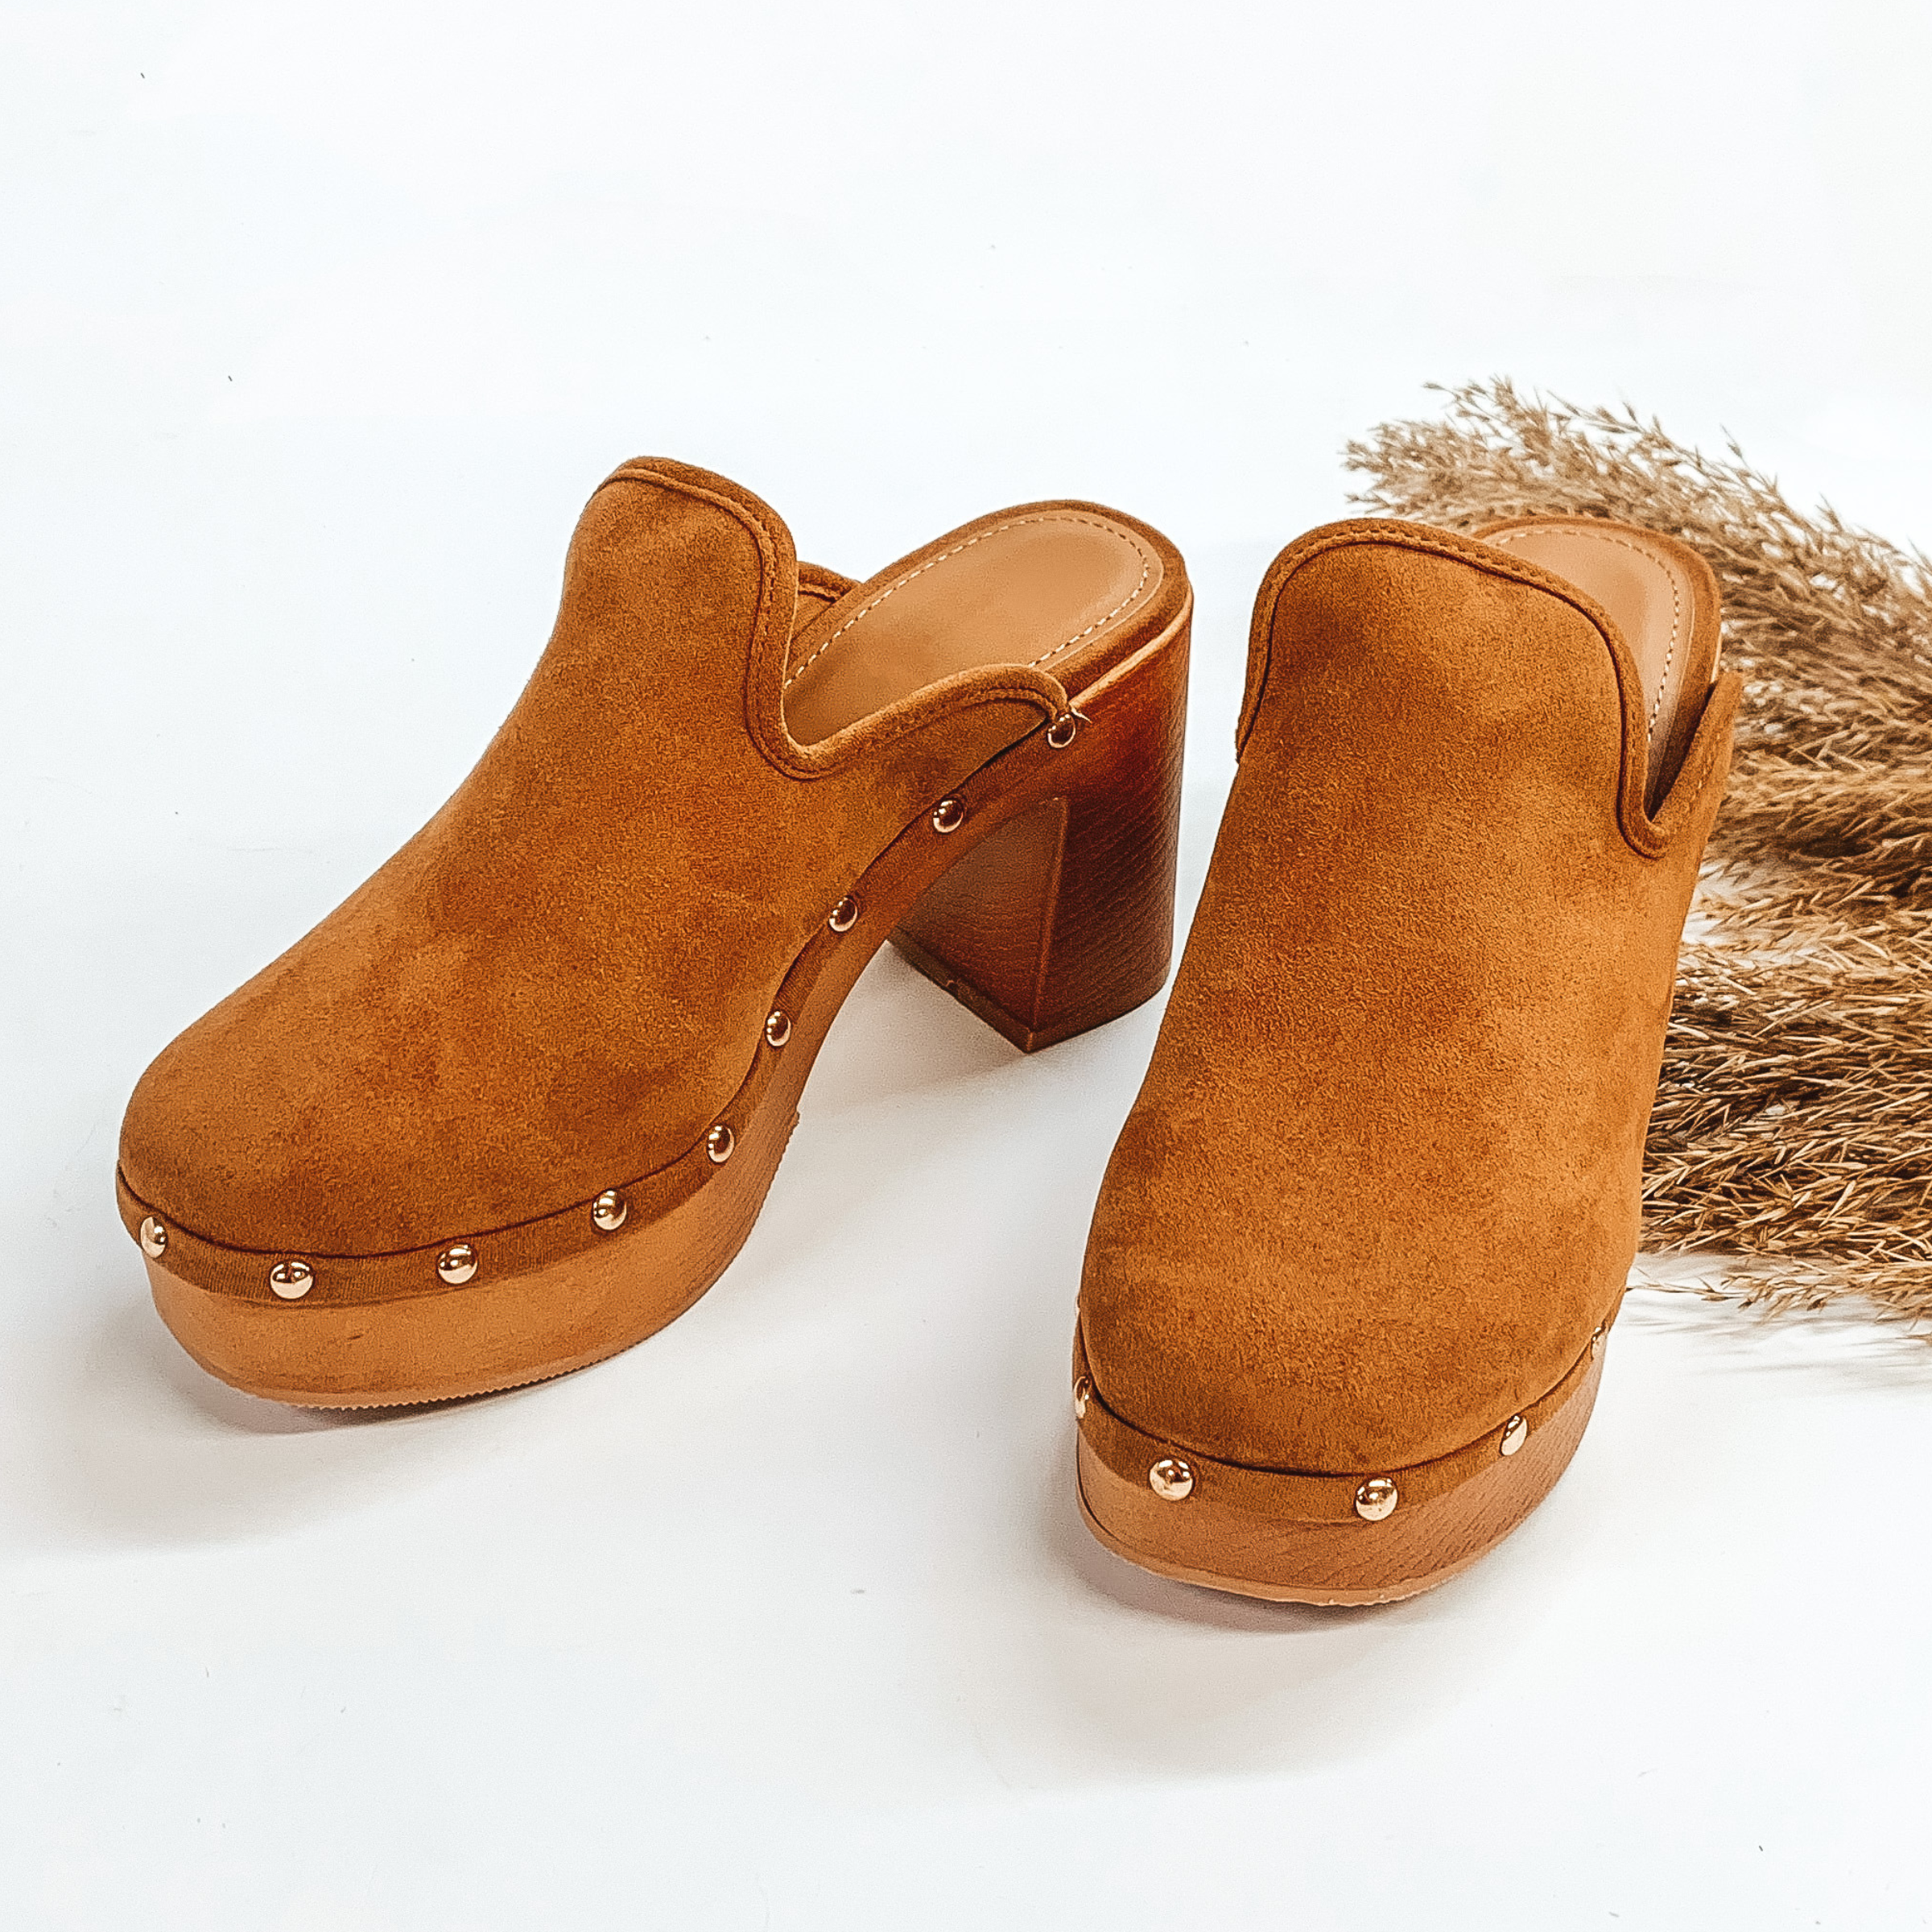 Groovy State of Mind Heeled Mules in Camel